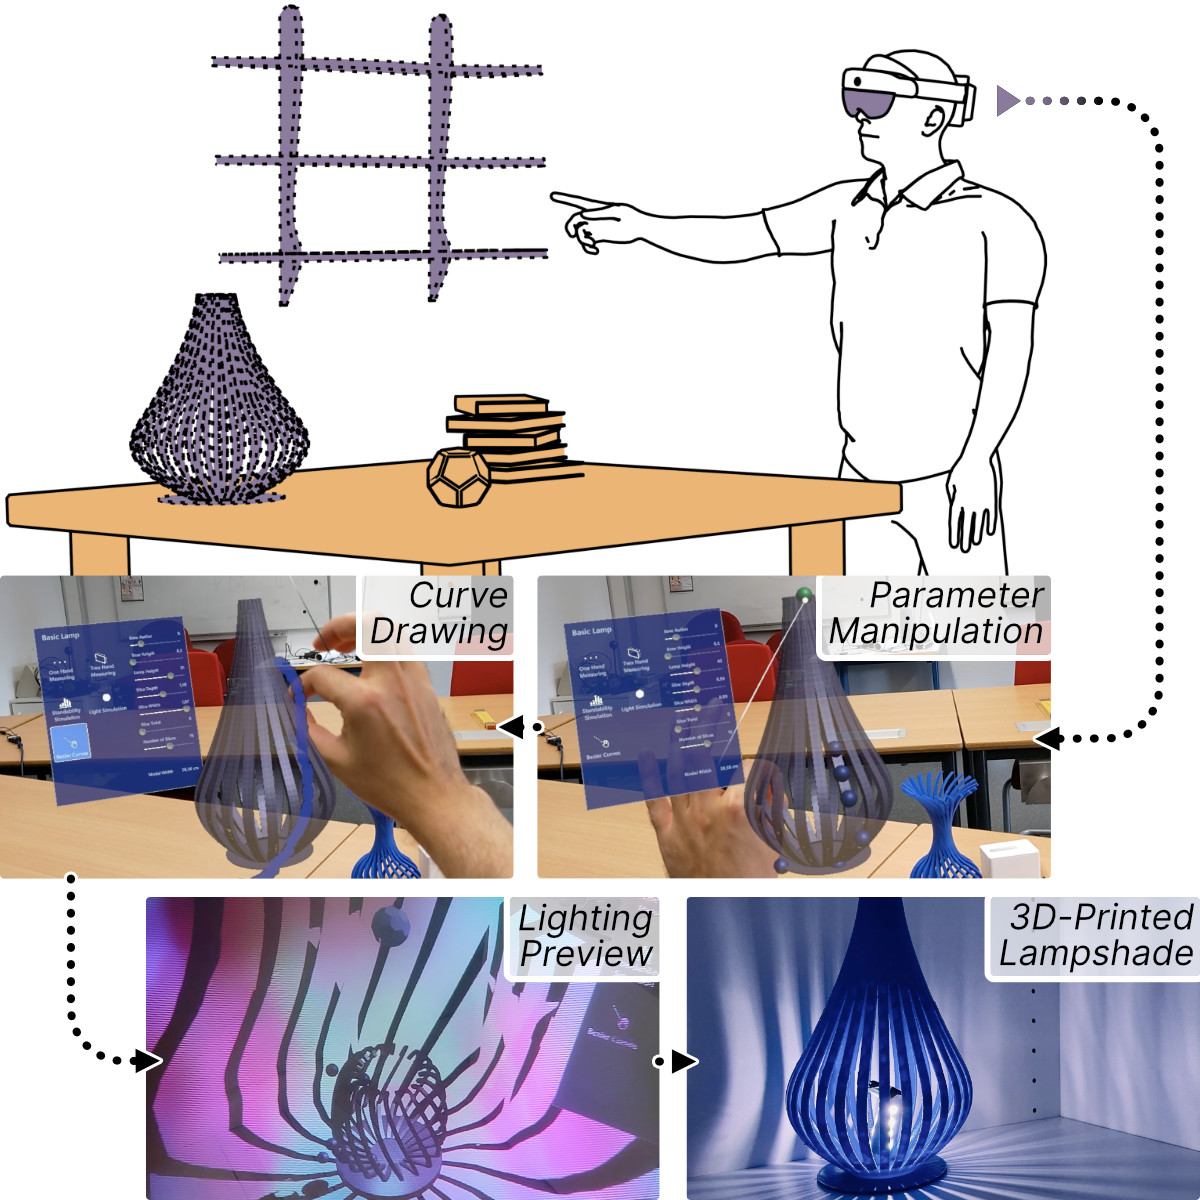 pARam: Leveraging Parametric Design in Extended Reality to Support the Personalization of Artifacts for Personal Fabrication